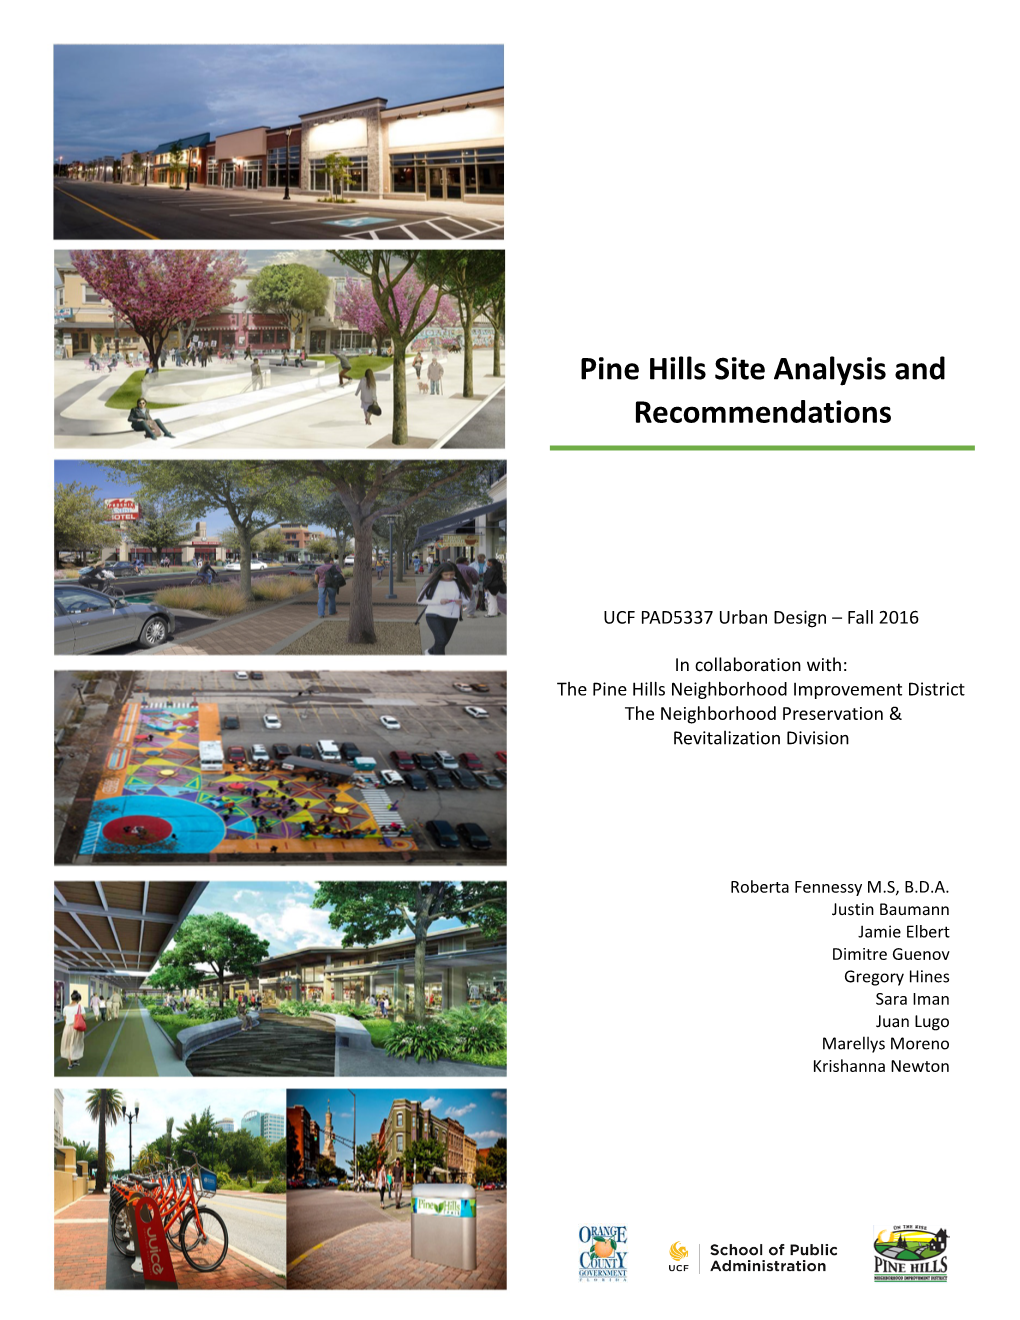 Pine Hills Site Analysis and Recommendations